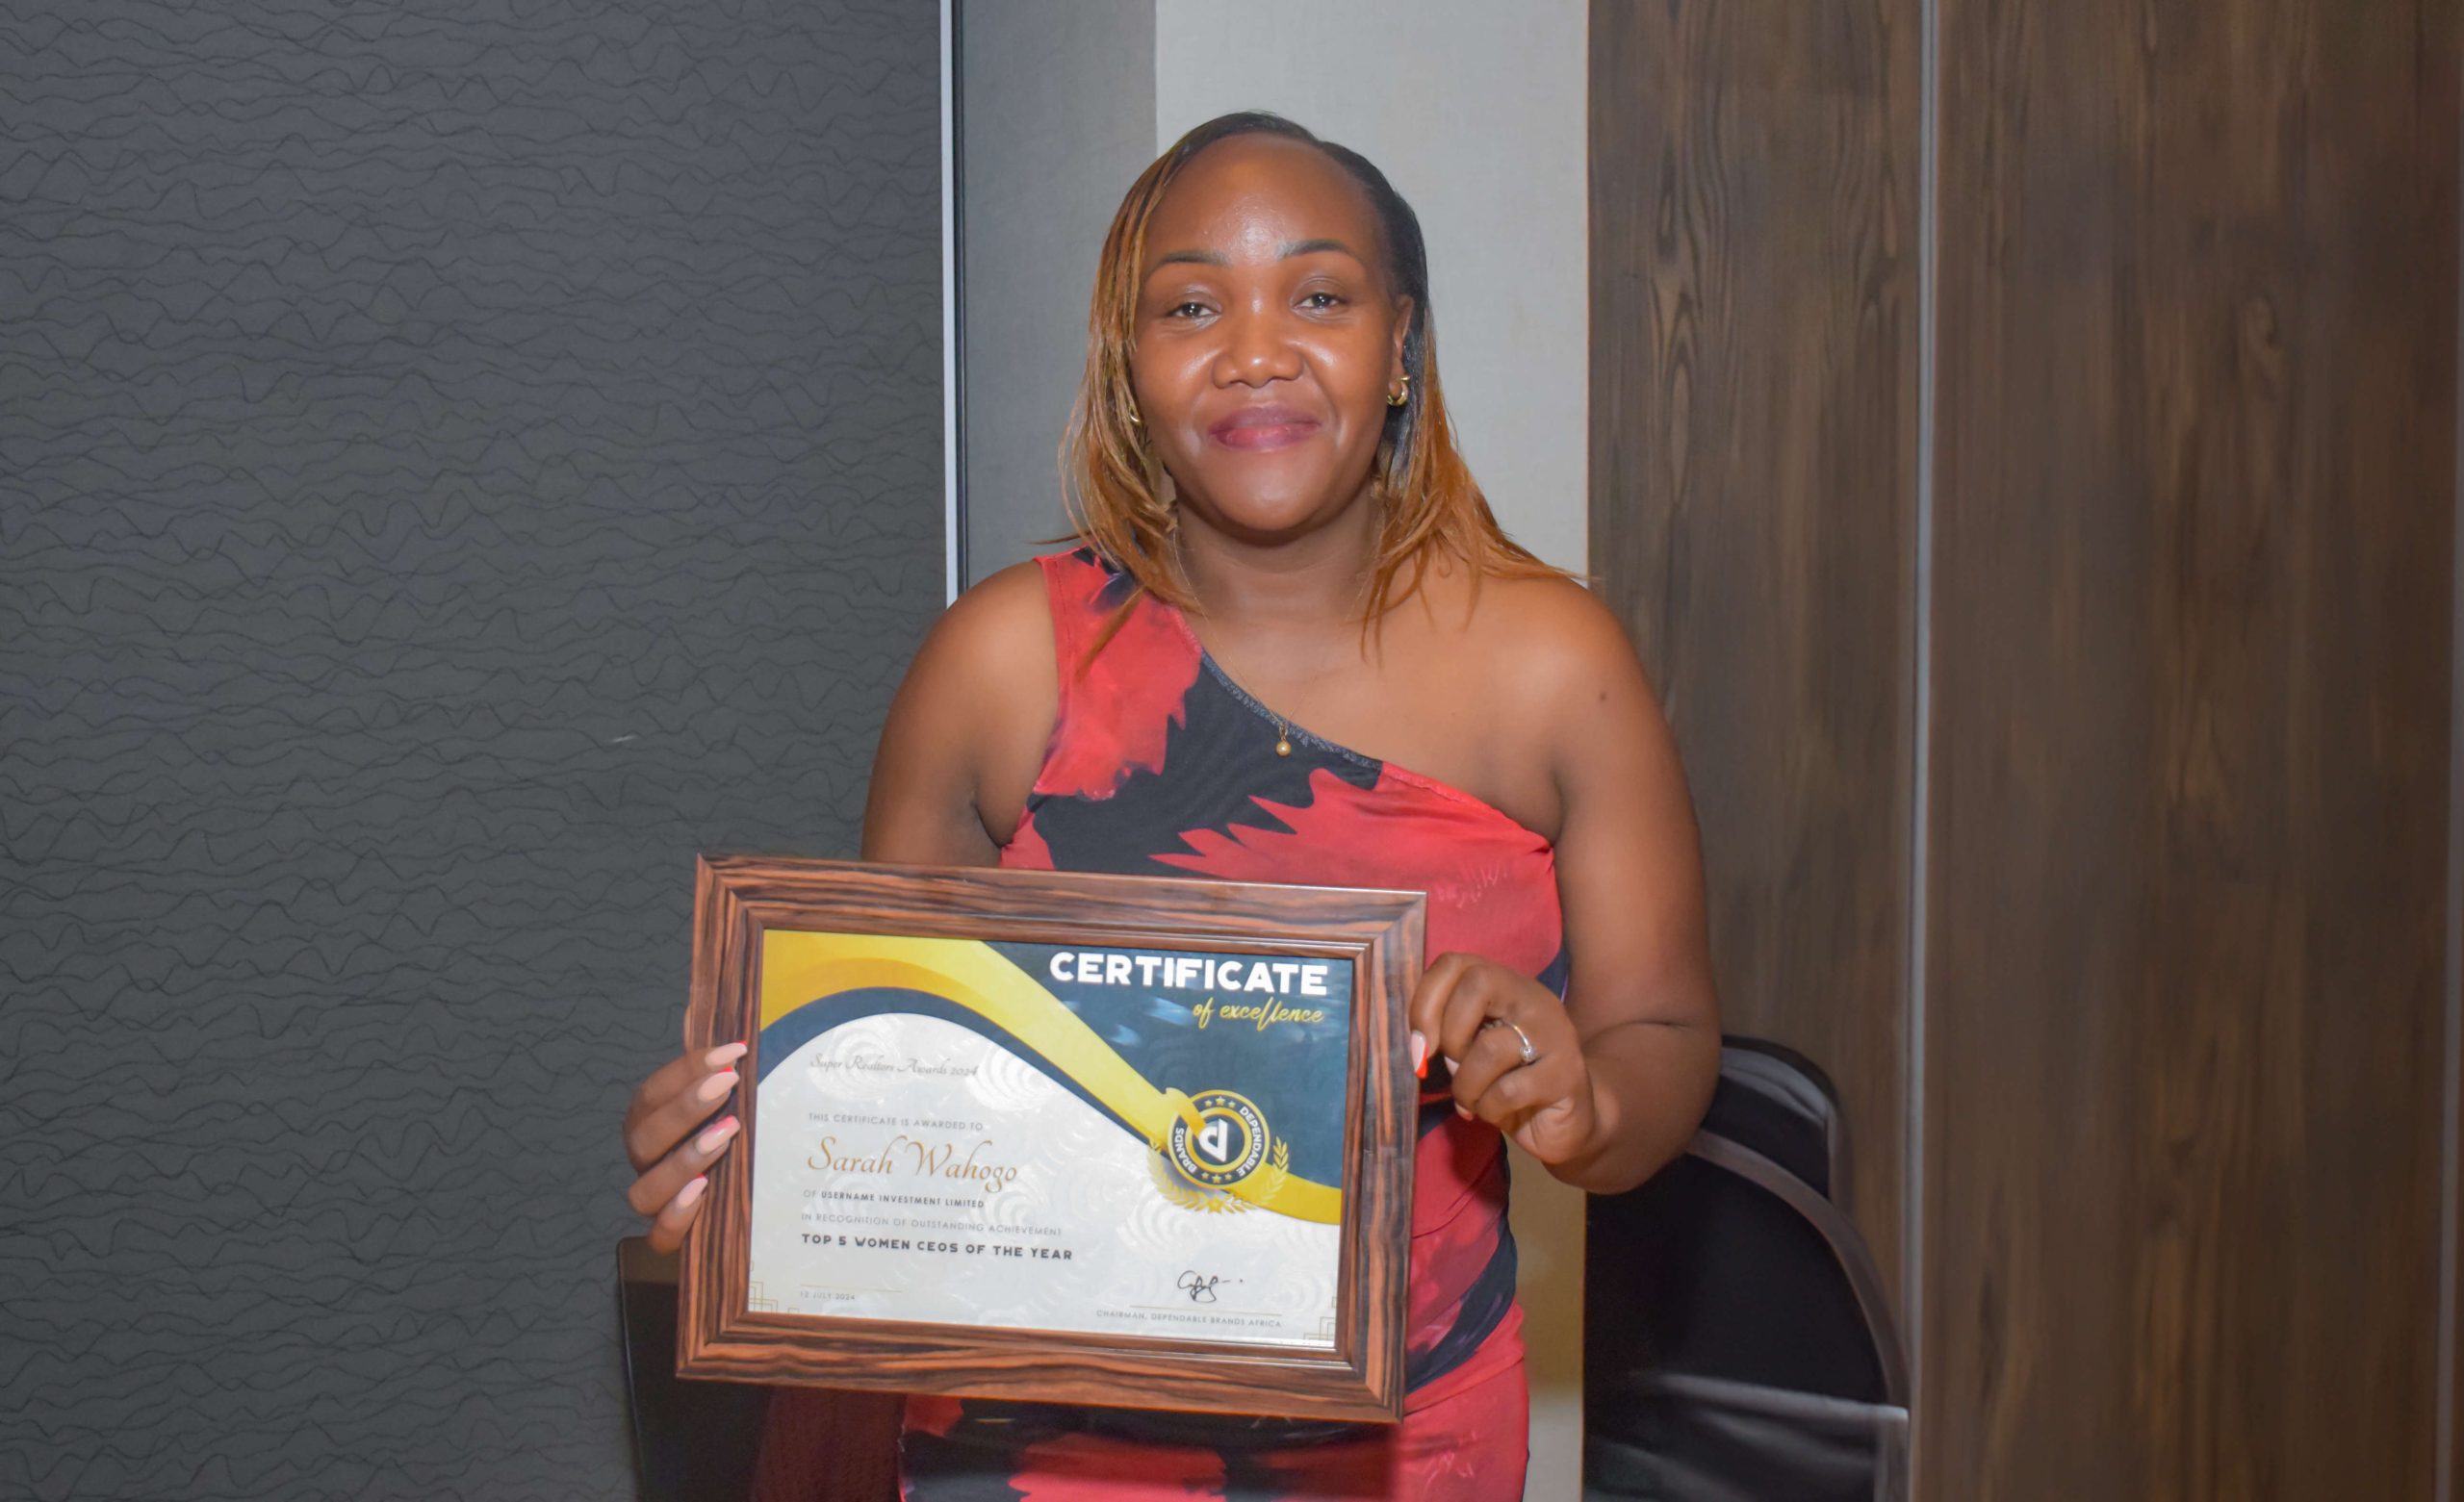 CEO Sarah Wahogo Recognized As Top 5 Women In Real Estate